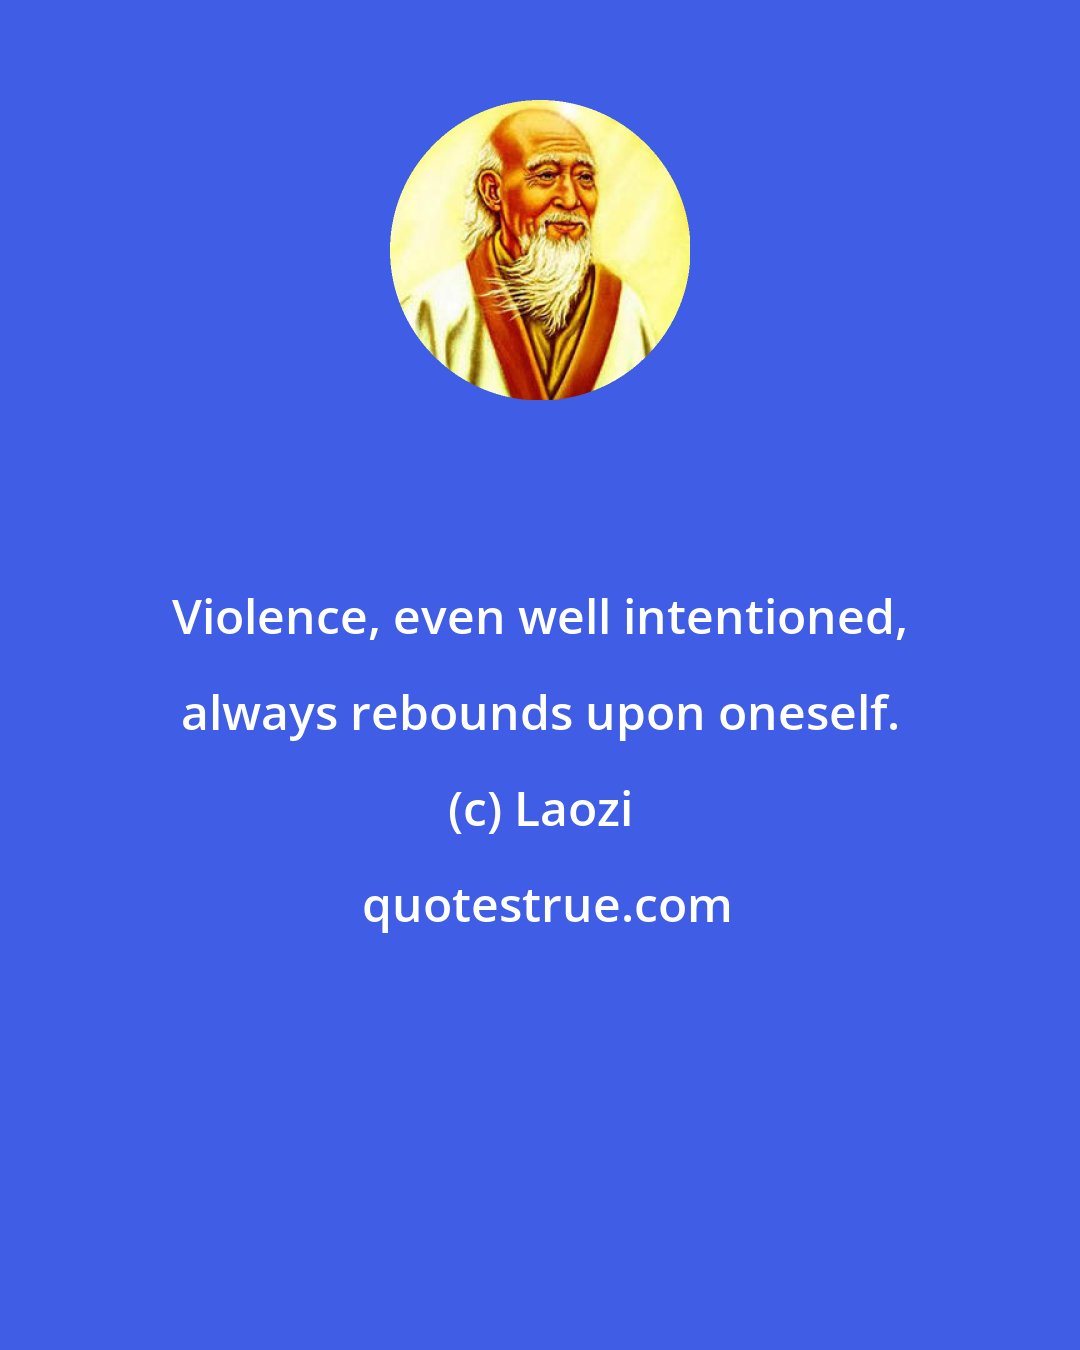 Laozi: Violence, even well intentioned, always rebounds upon oneself.